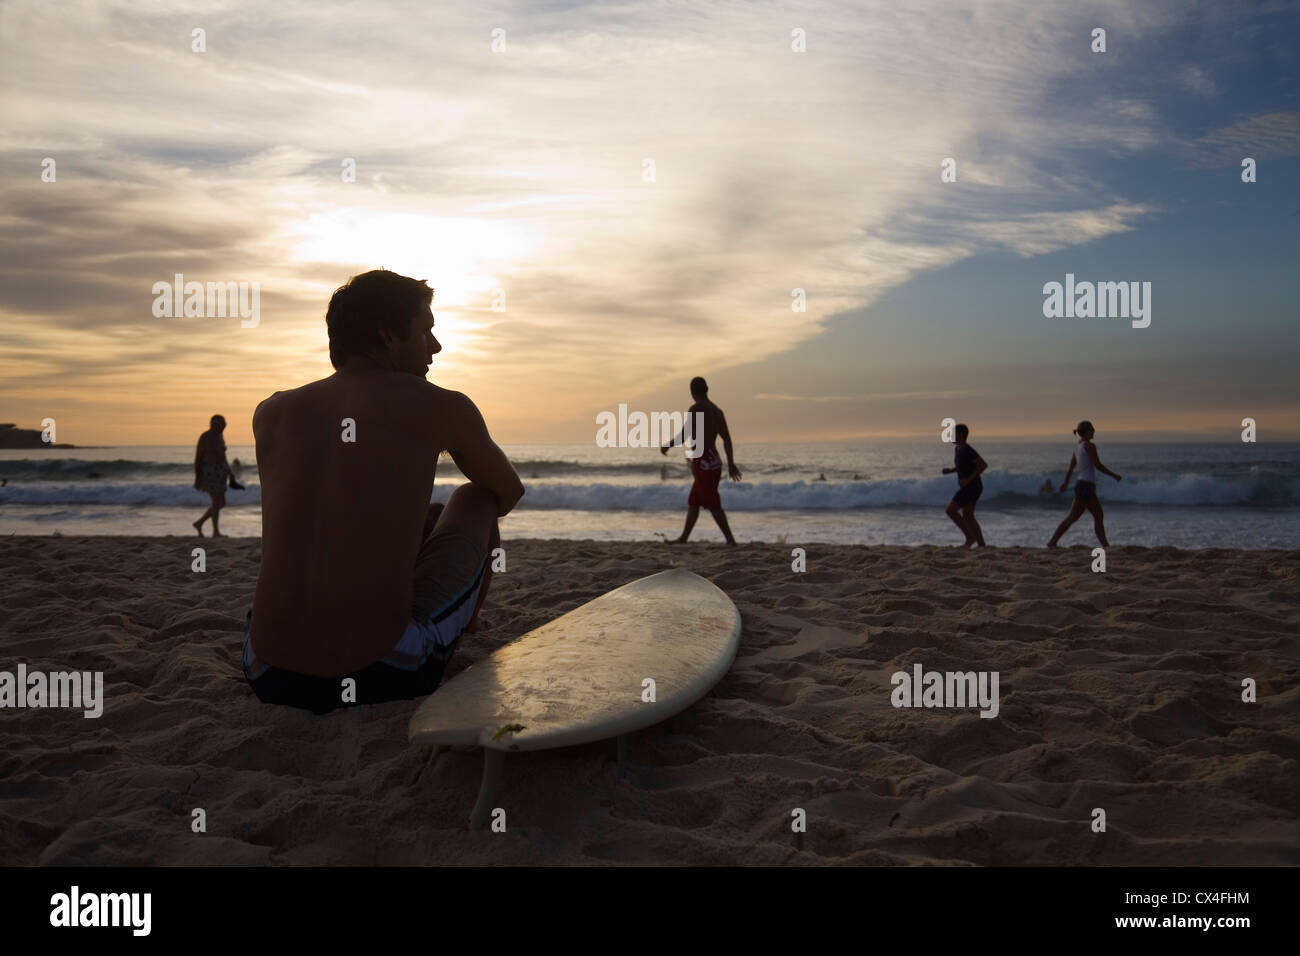 Man sitting on beach with surfboard. Bondi Beach, Sydney, New South Wales, Australia Banque D'Images